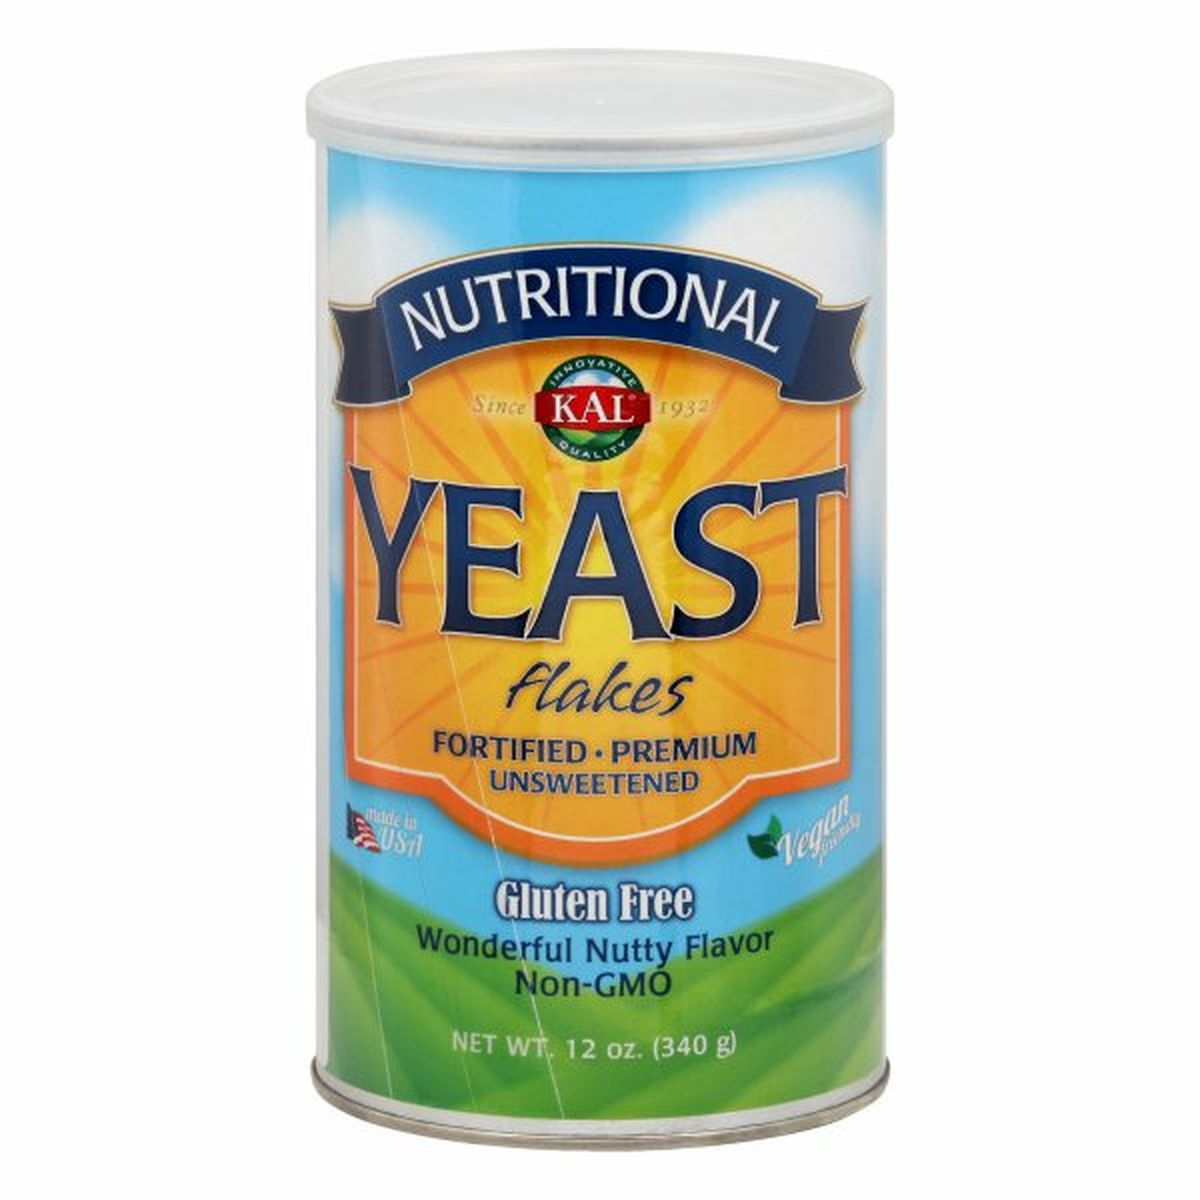 Calories in Kal Yeast Flakes, Gluten Free, Unsweetened, Wonderful Nutty Flavor